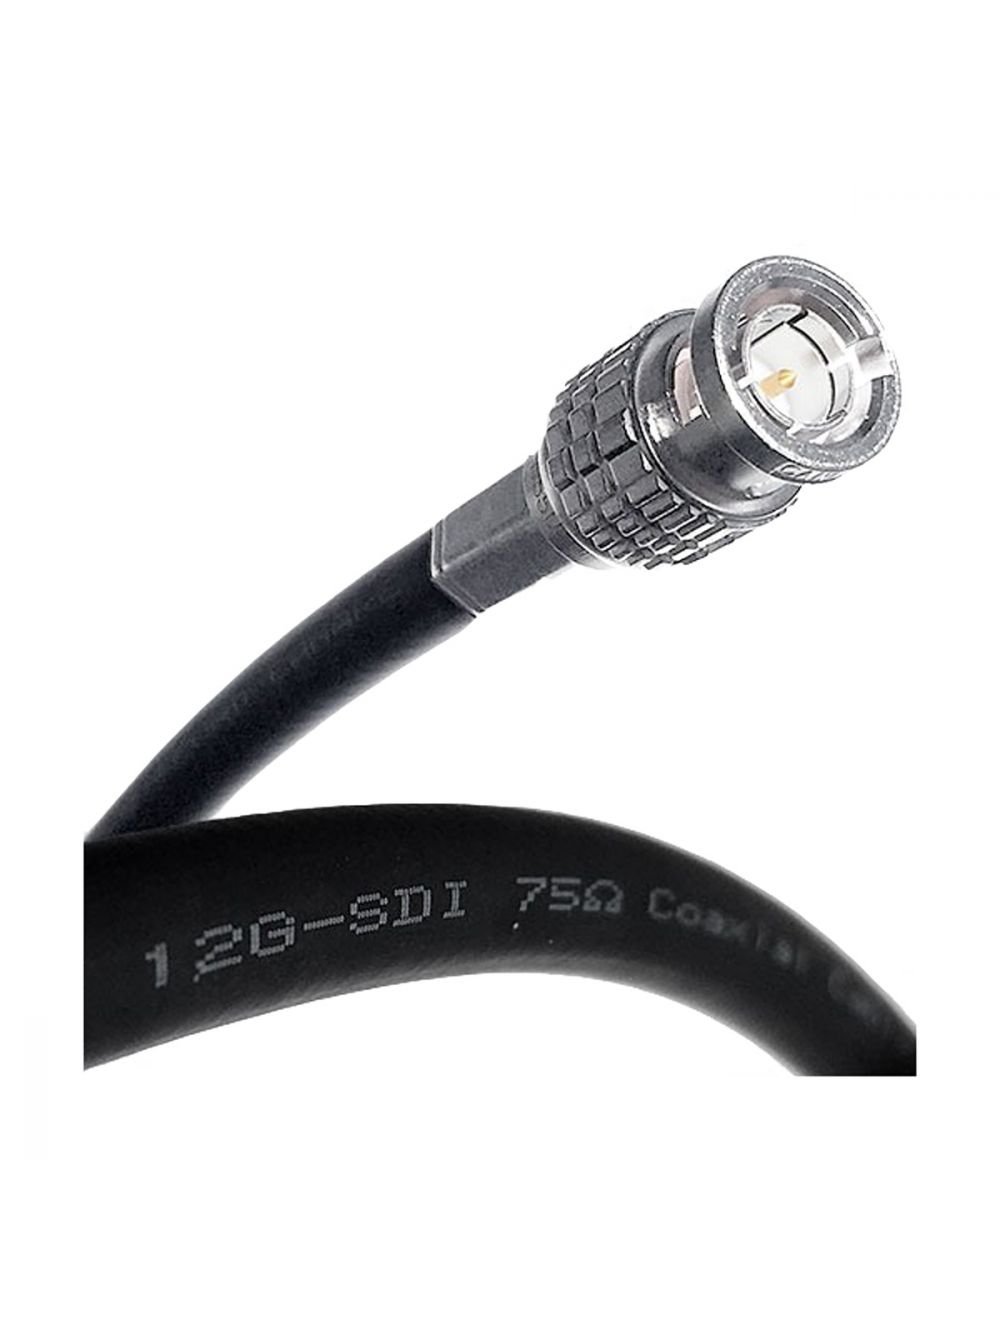 CANARE L-5CFB HD-SDI RG-6 Digital Video Cable 75 ohm BNC Male to BNC Male 350 FT 